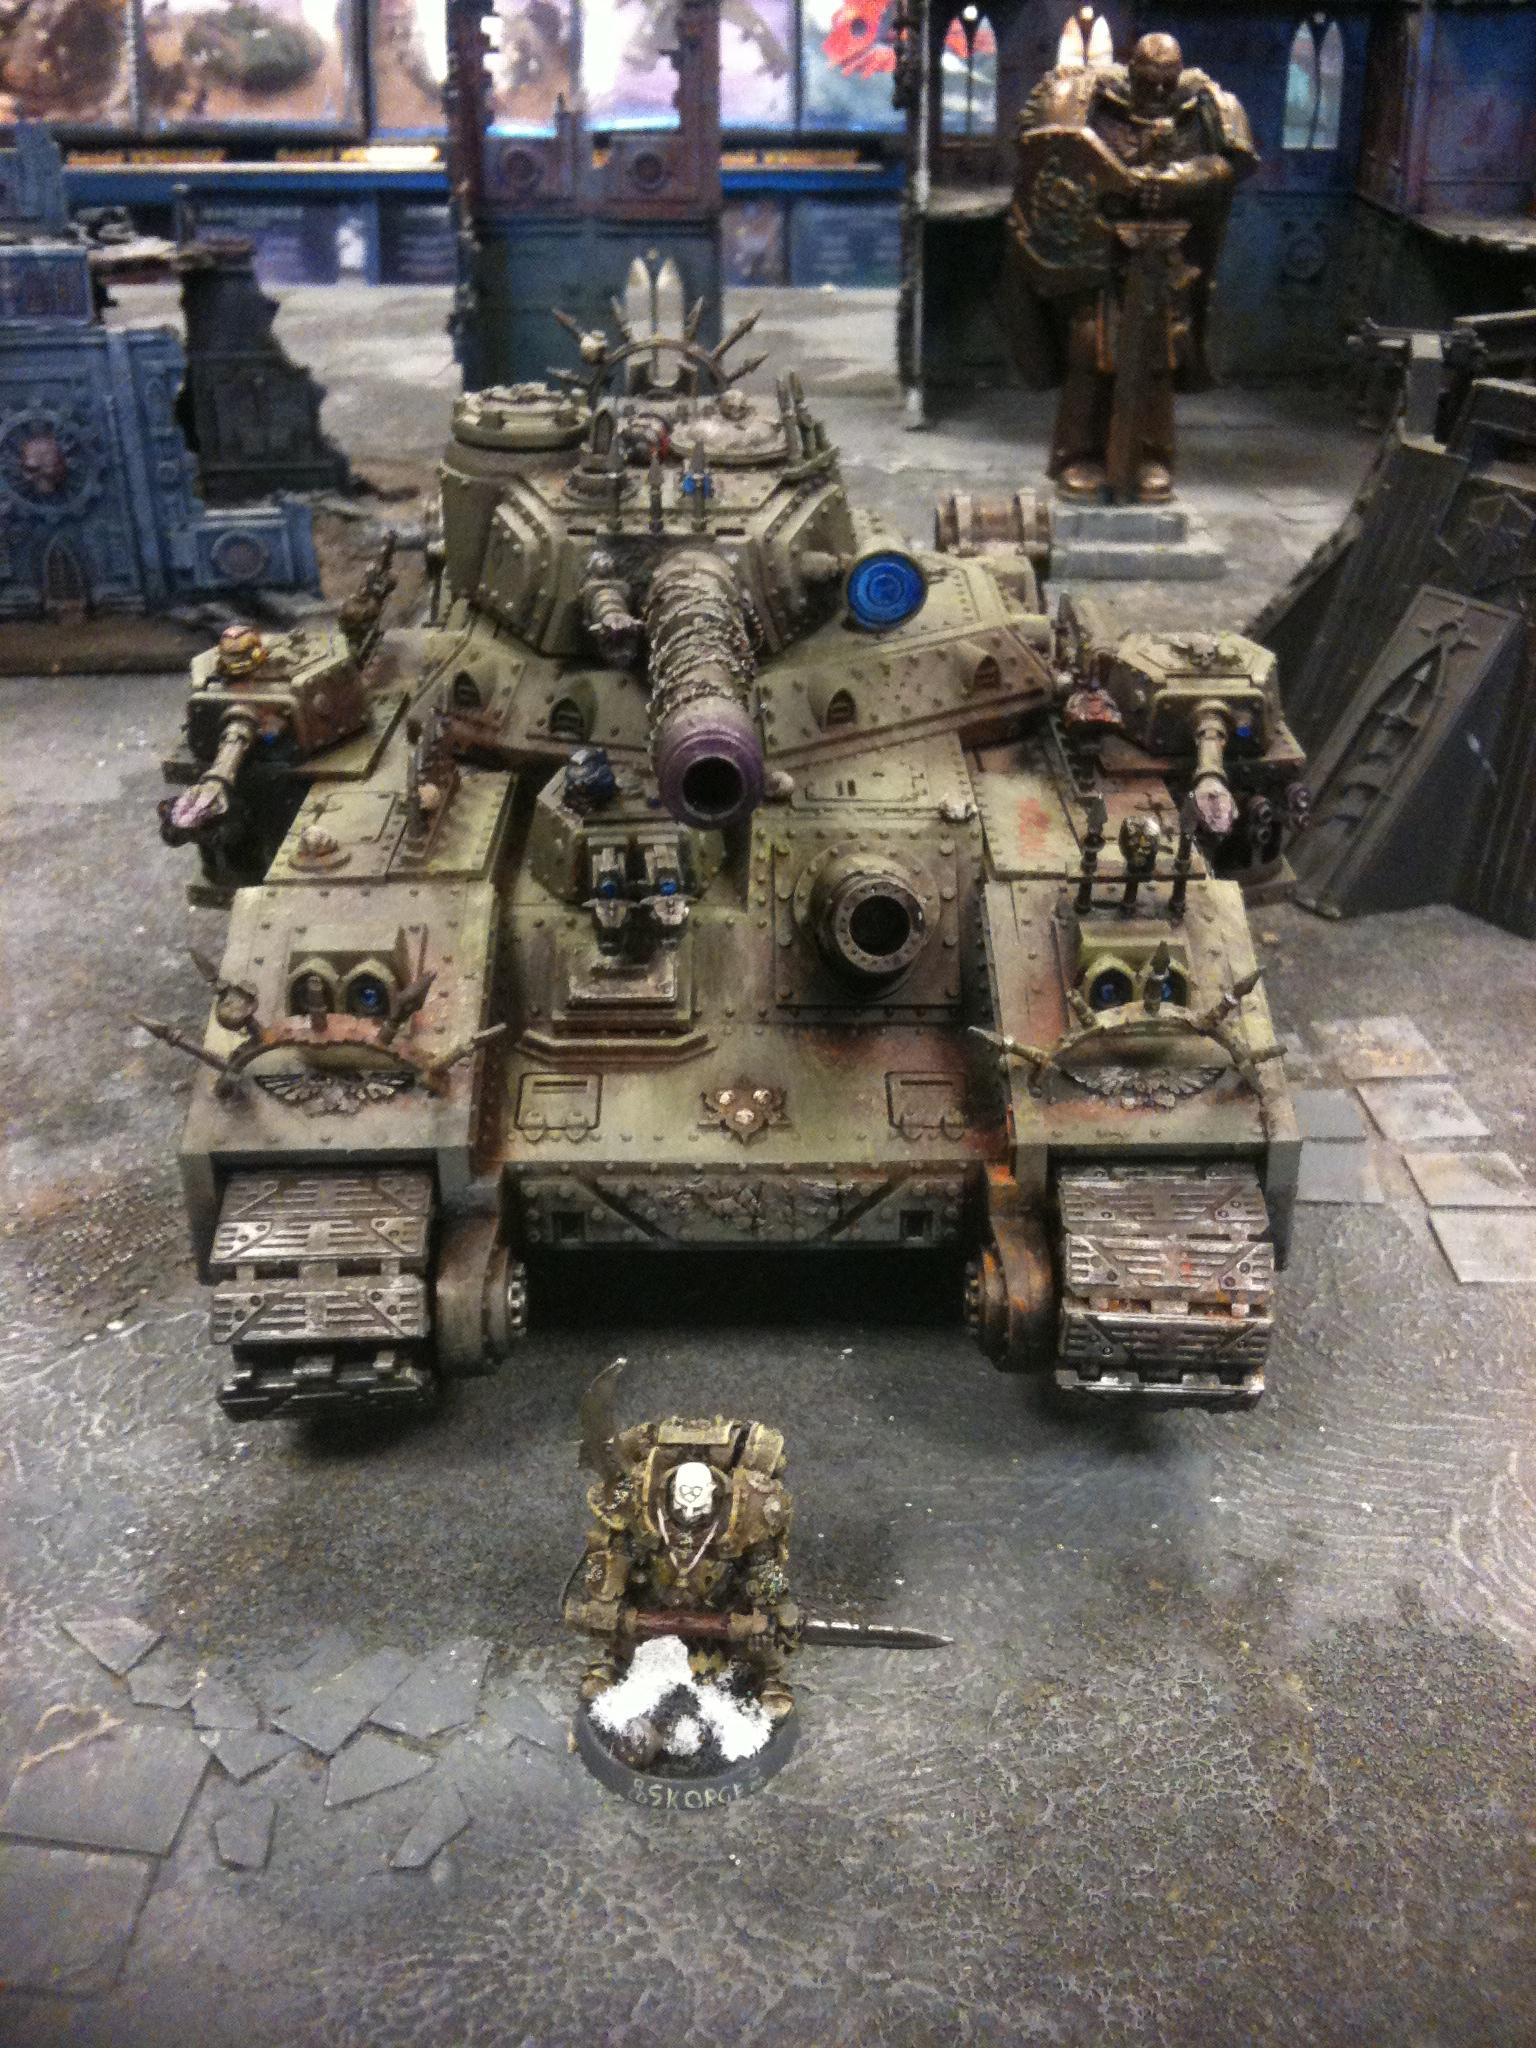 Apocalypse, Baneblade, Chaos, Chaos Lord, Chaos Space Marines, Gree, Imperial Guard, Lord, Nurgle, Renegade, Rotten, Space Marines, Tank, Vehicle